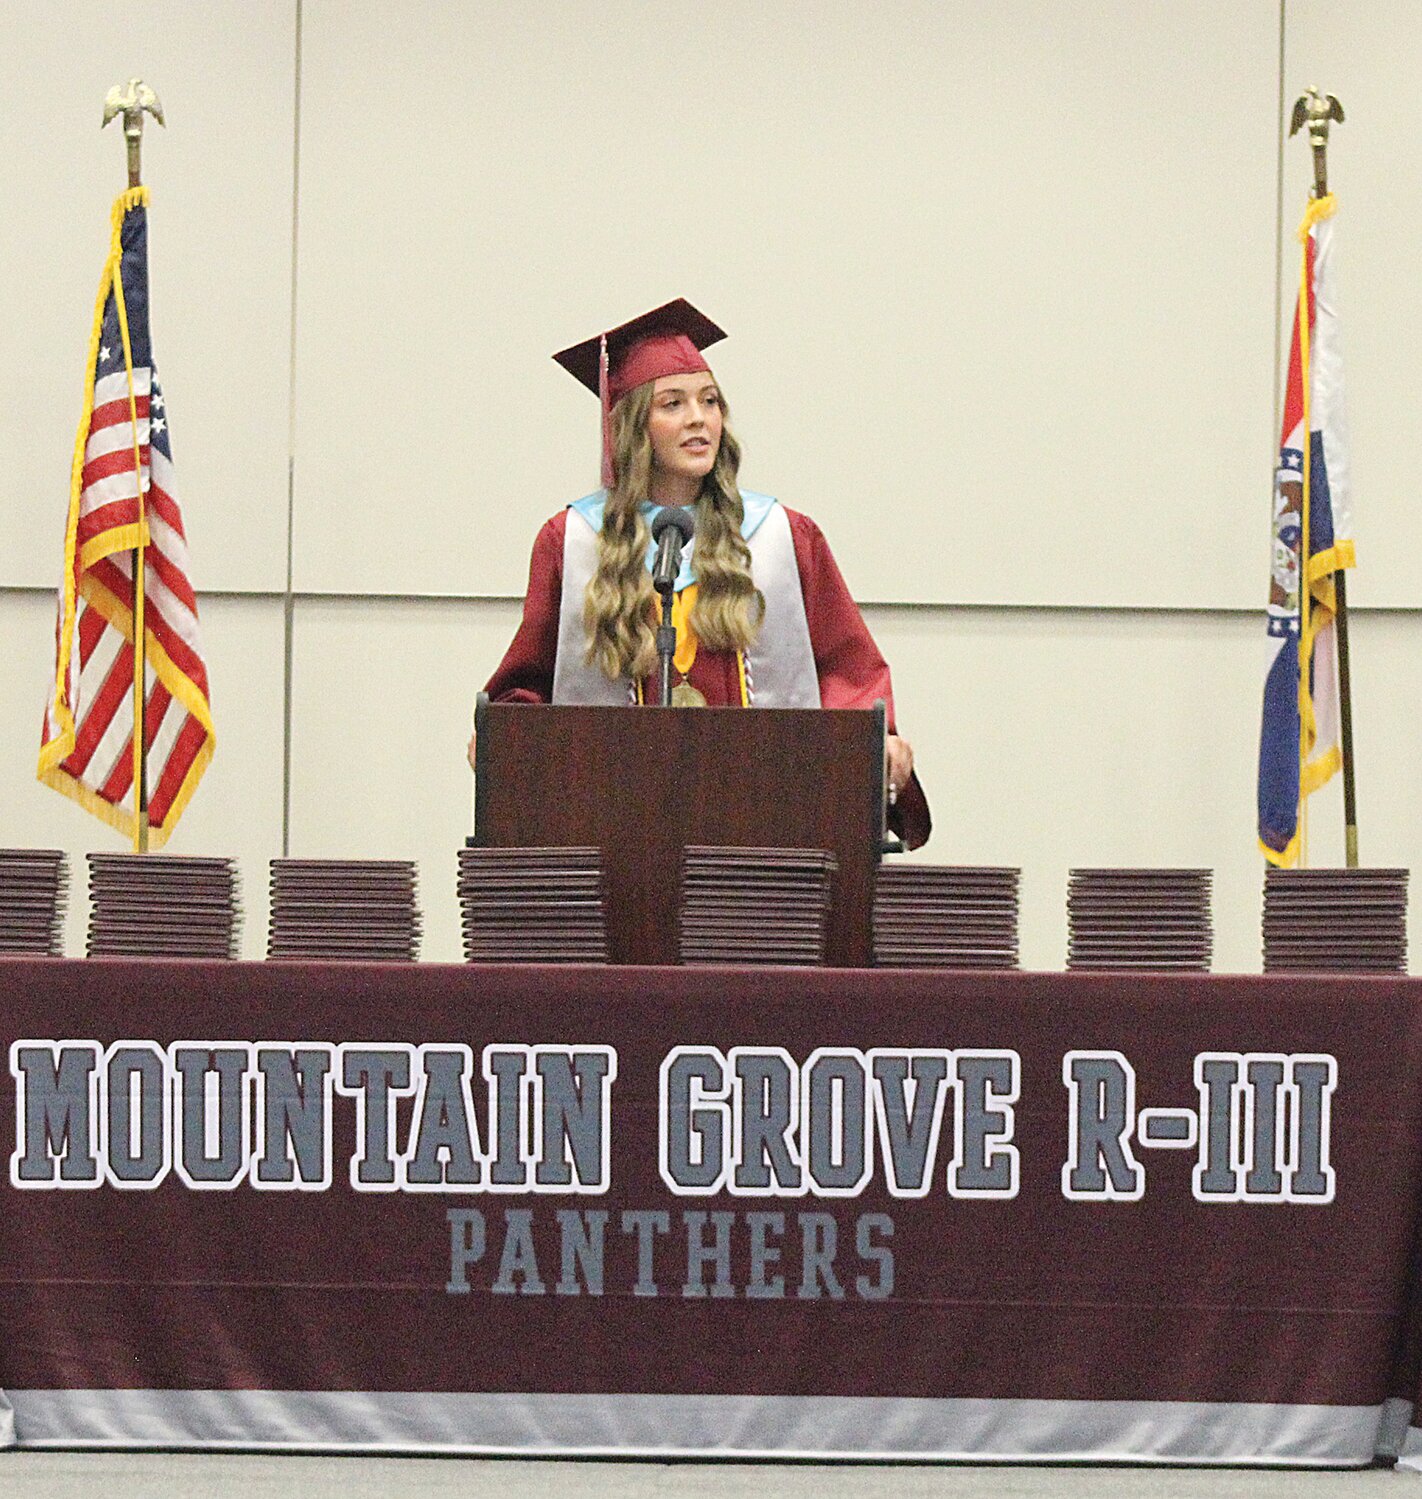 Mountain Grove Class President Reagan Hoerning provides an address to the Class of 2023 during Commencement.